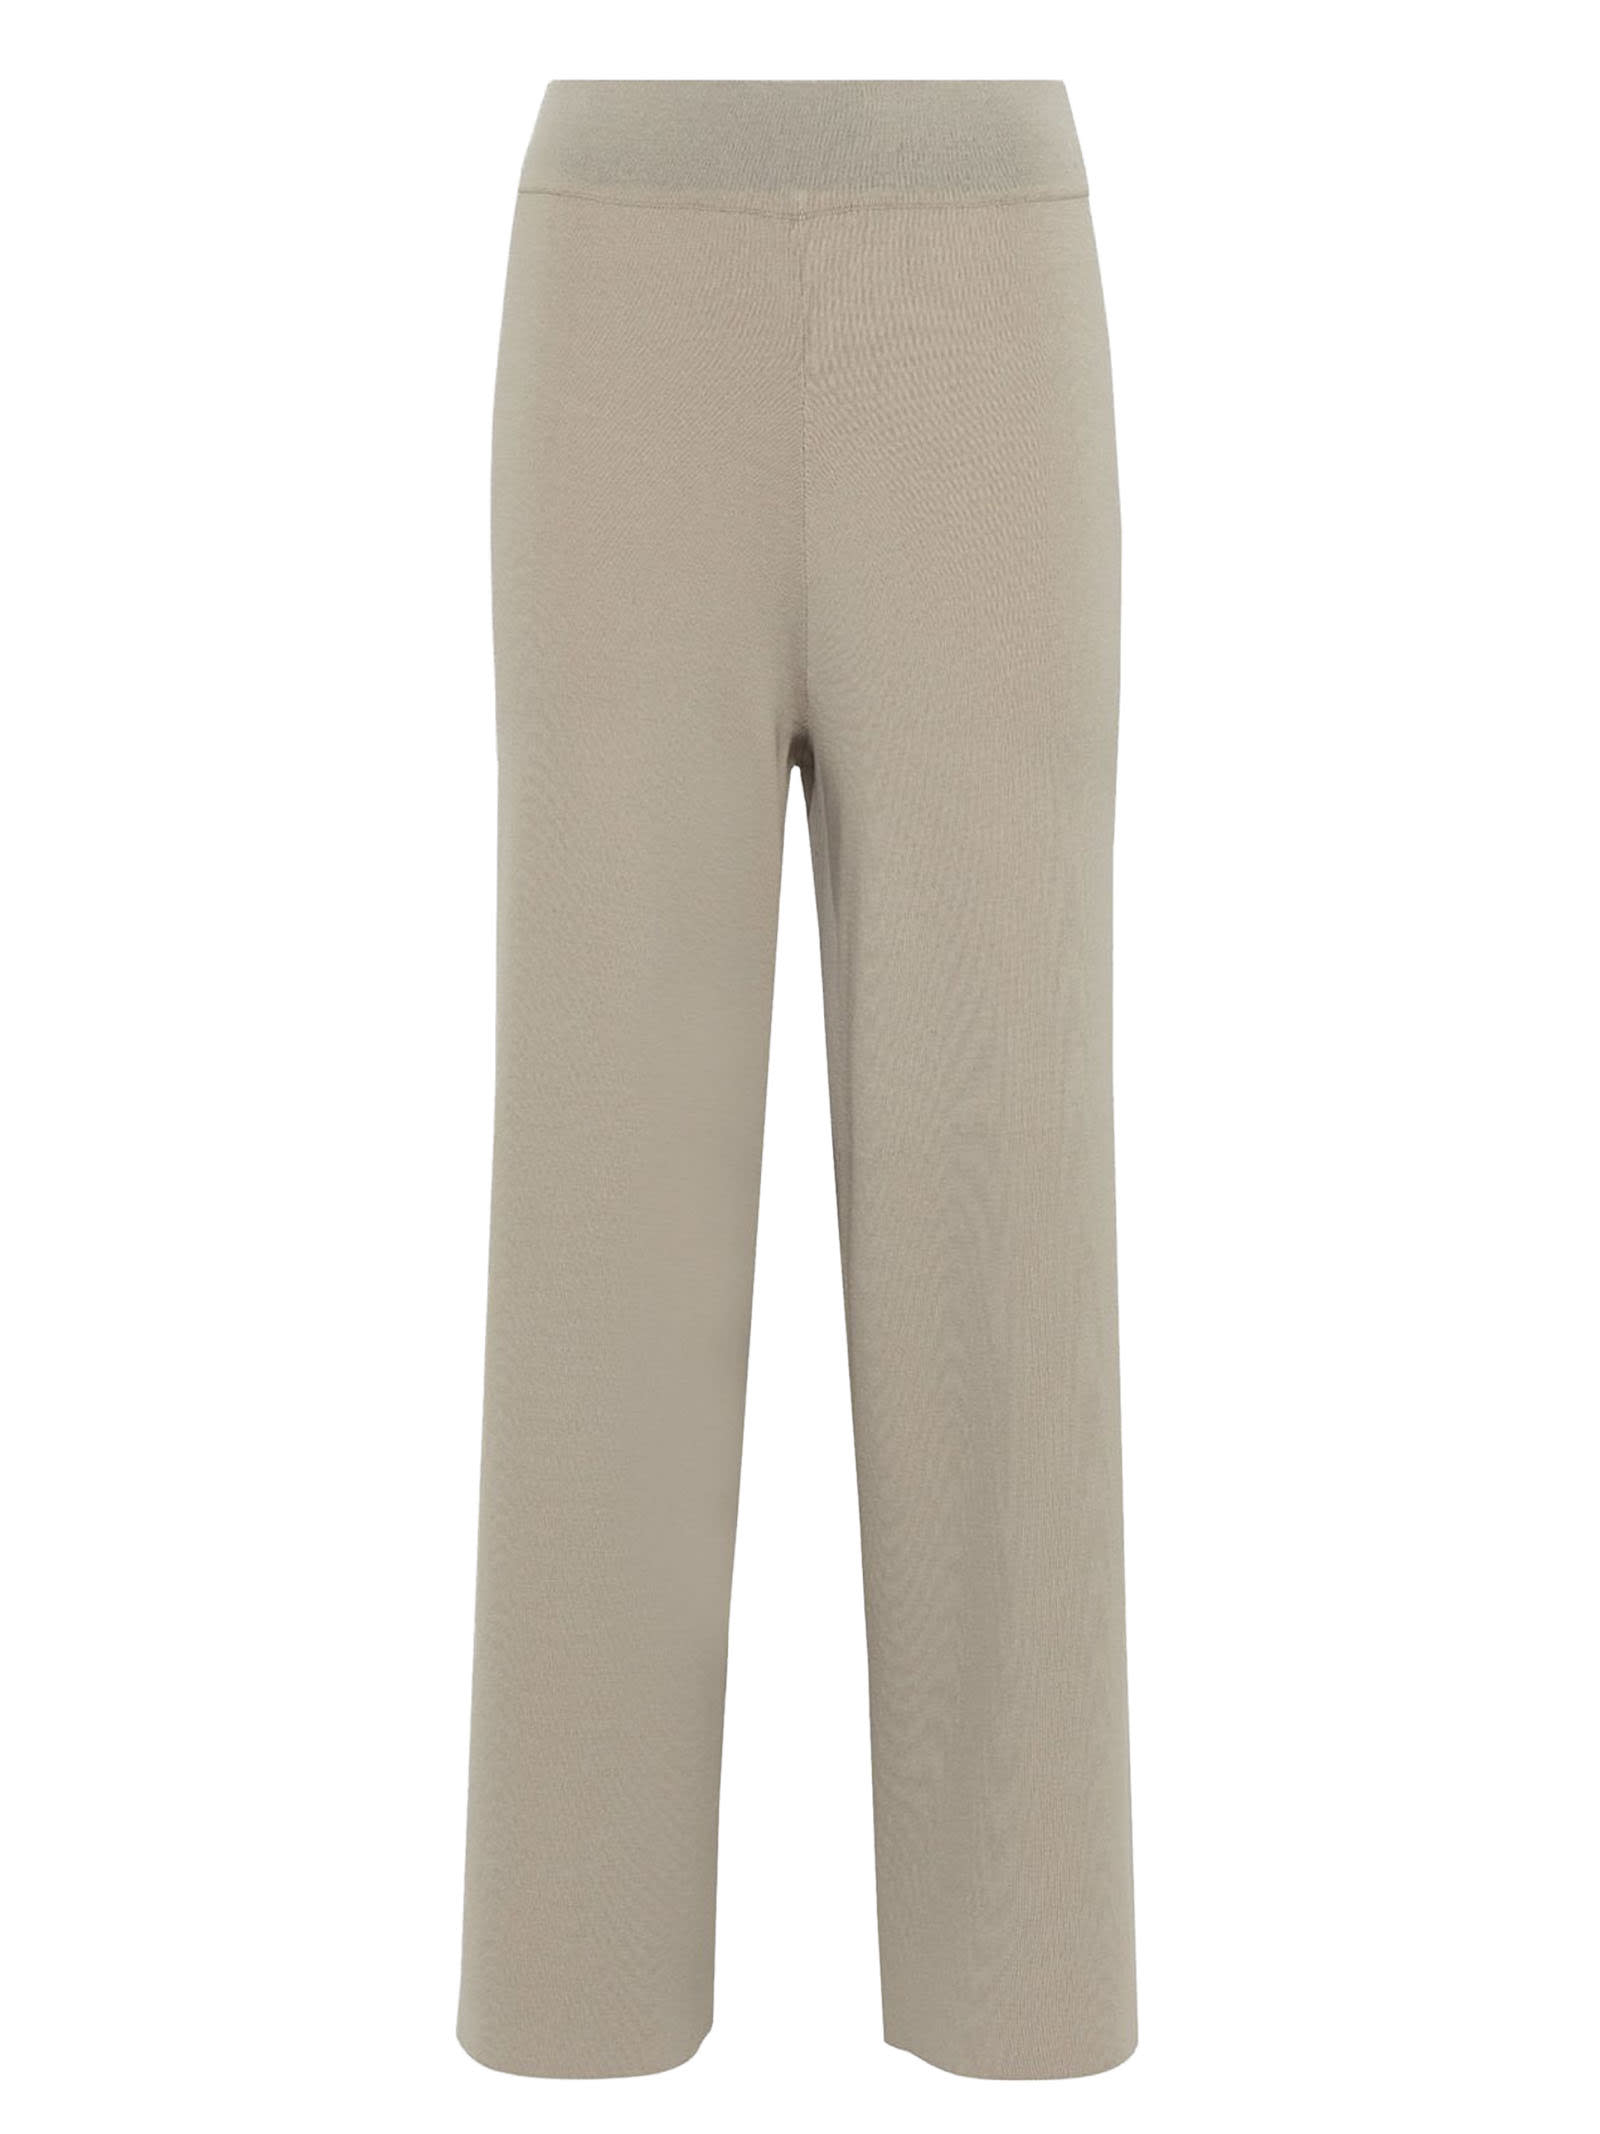 Garconne-style Pants In Ice Viscose Knit